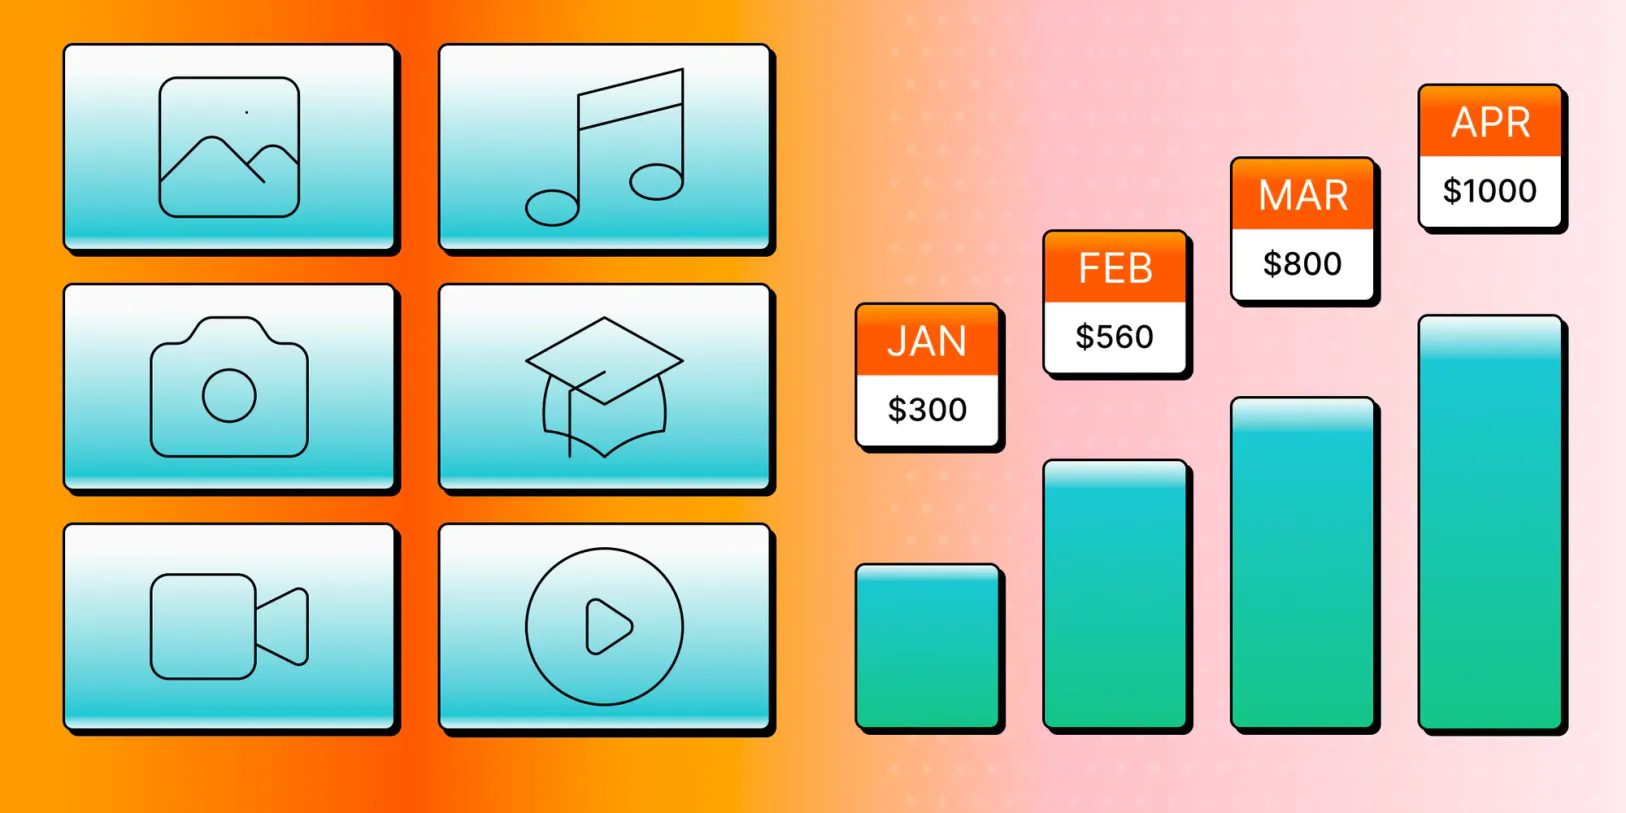 Display of icons and colorful charts with calendar months